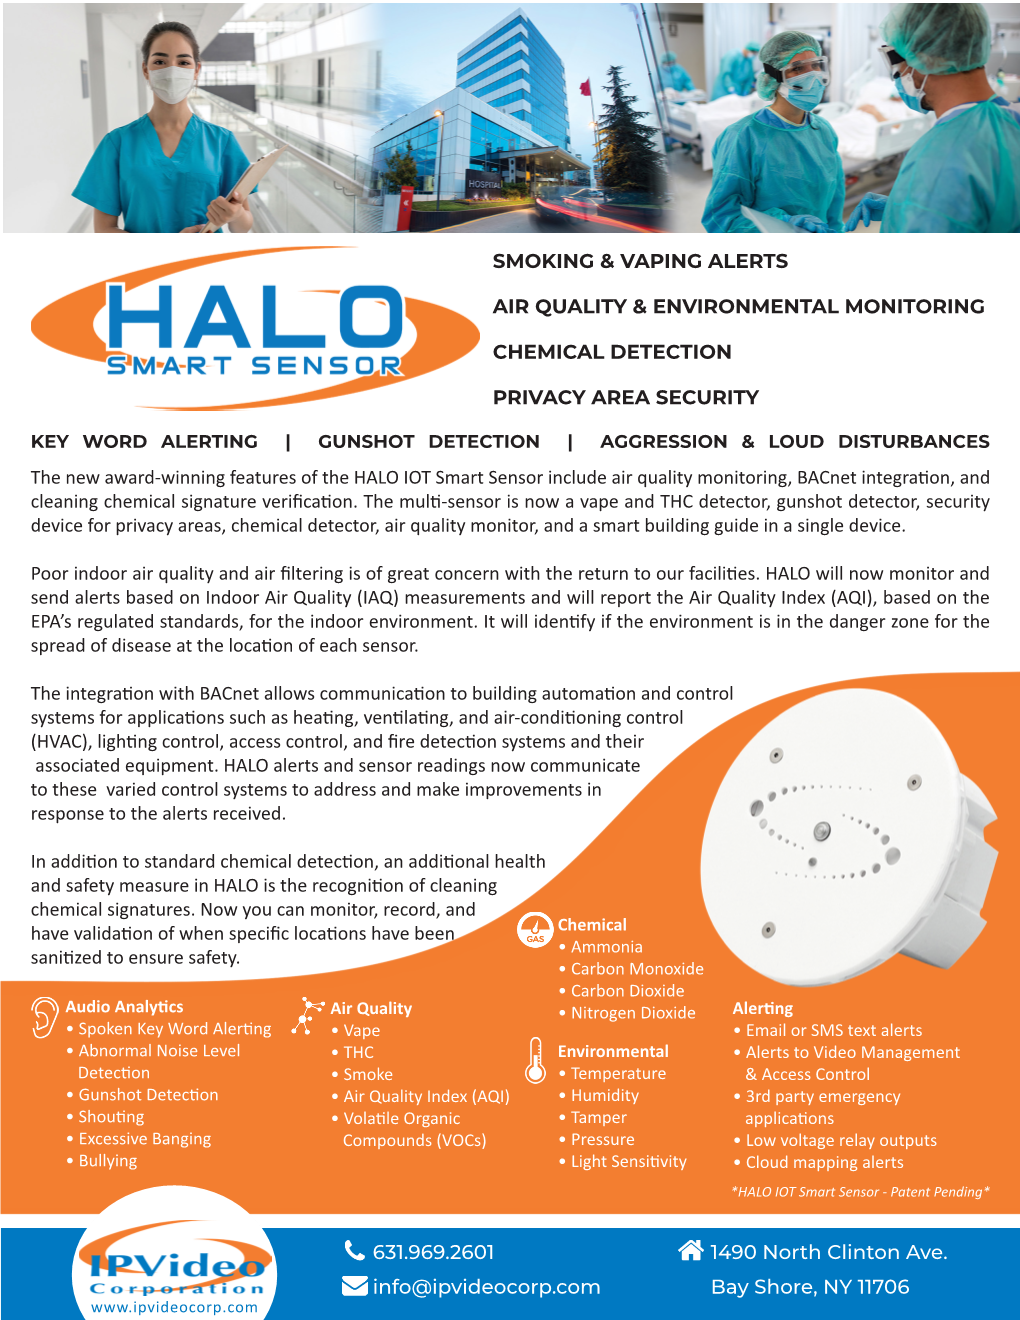 The New Award-Winning Features of the HALO IOT Smart Sensor Include Air Quality Monitoring, Bacnet Integration, and Cleaning Chemical Signature Verification